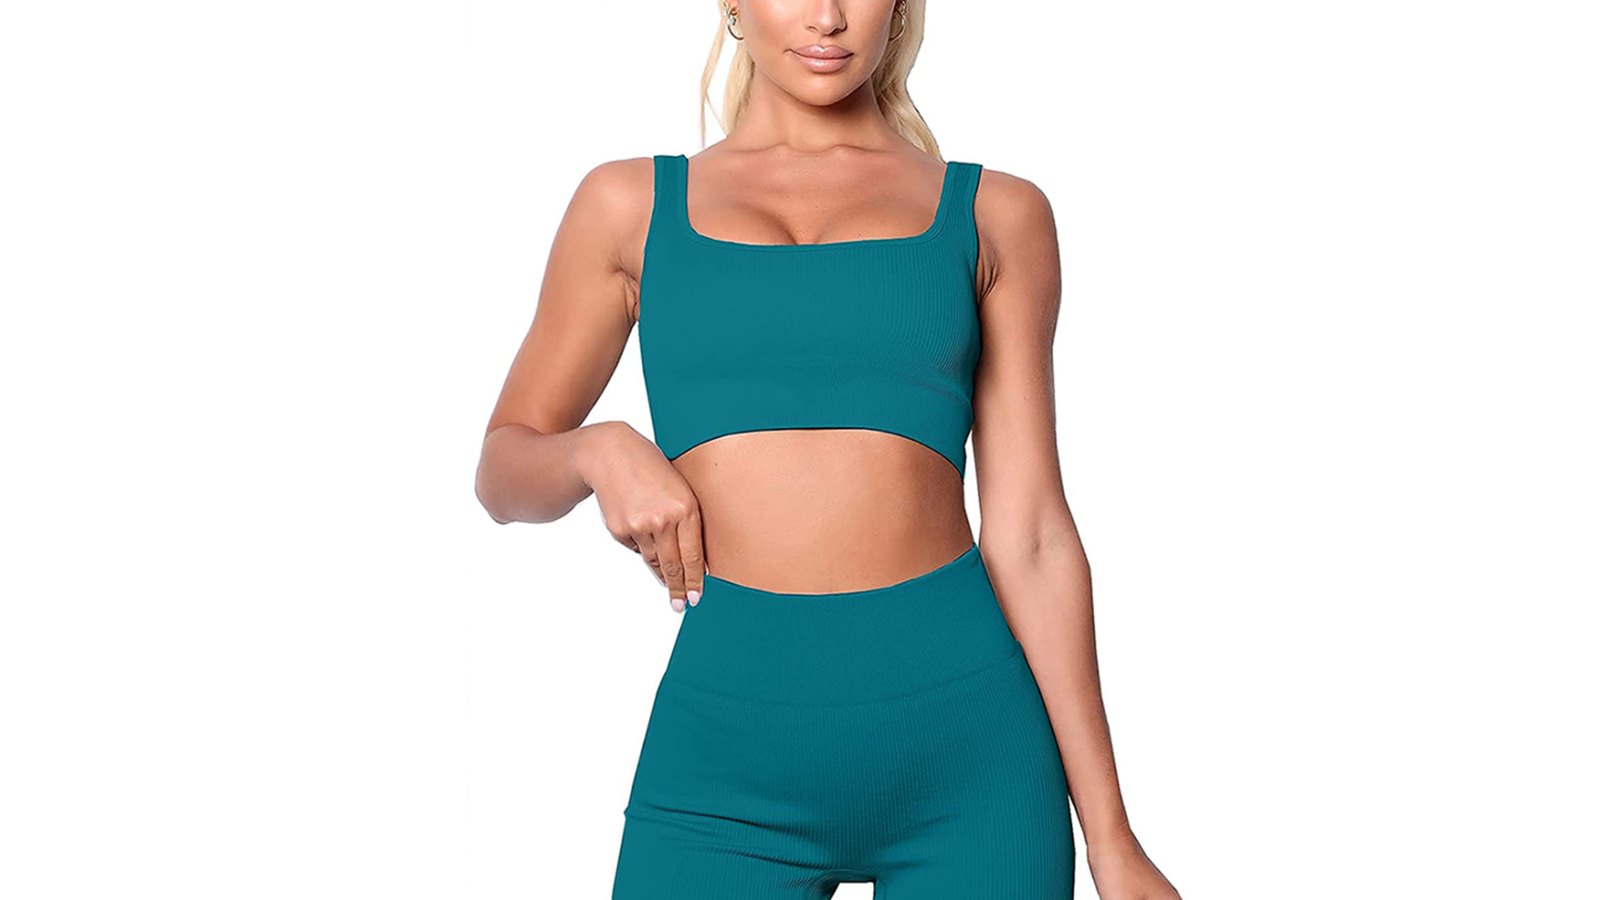 Shop These 5 Flattering Fitness Sets for Spring — All Under $36!